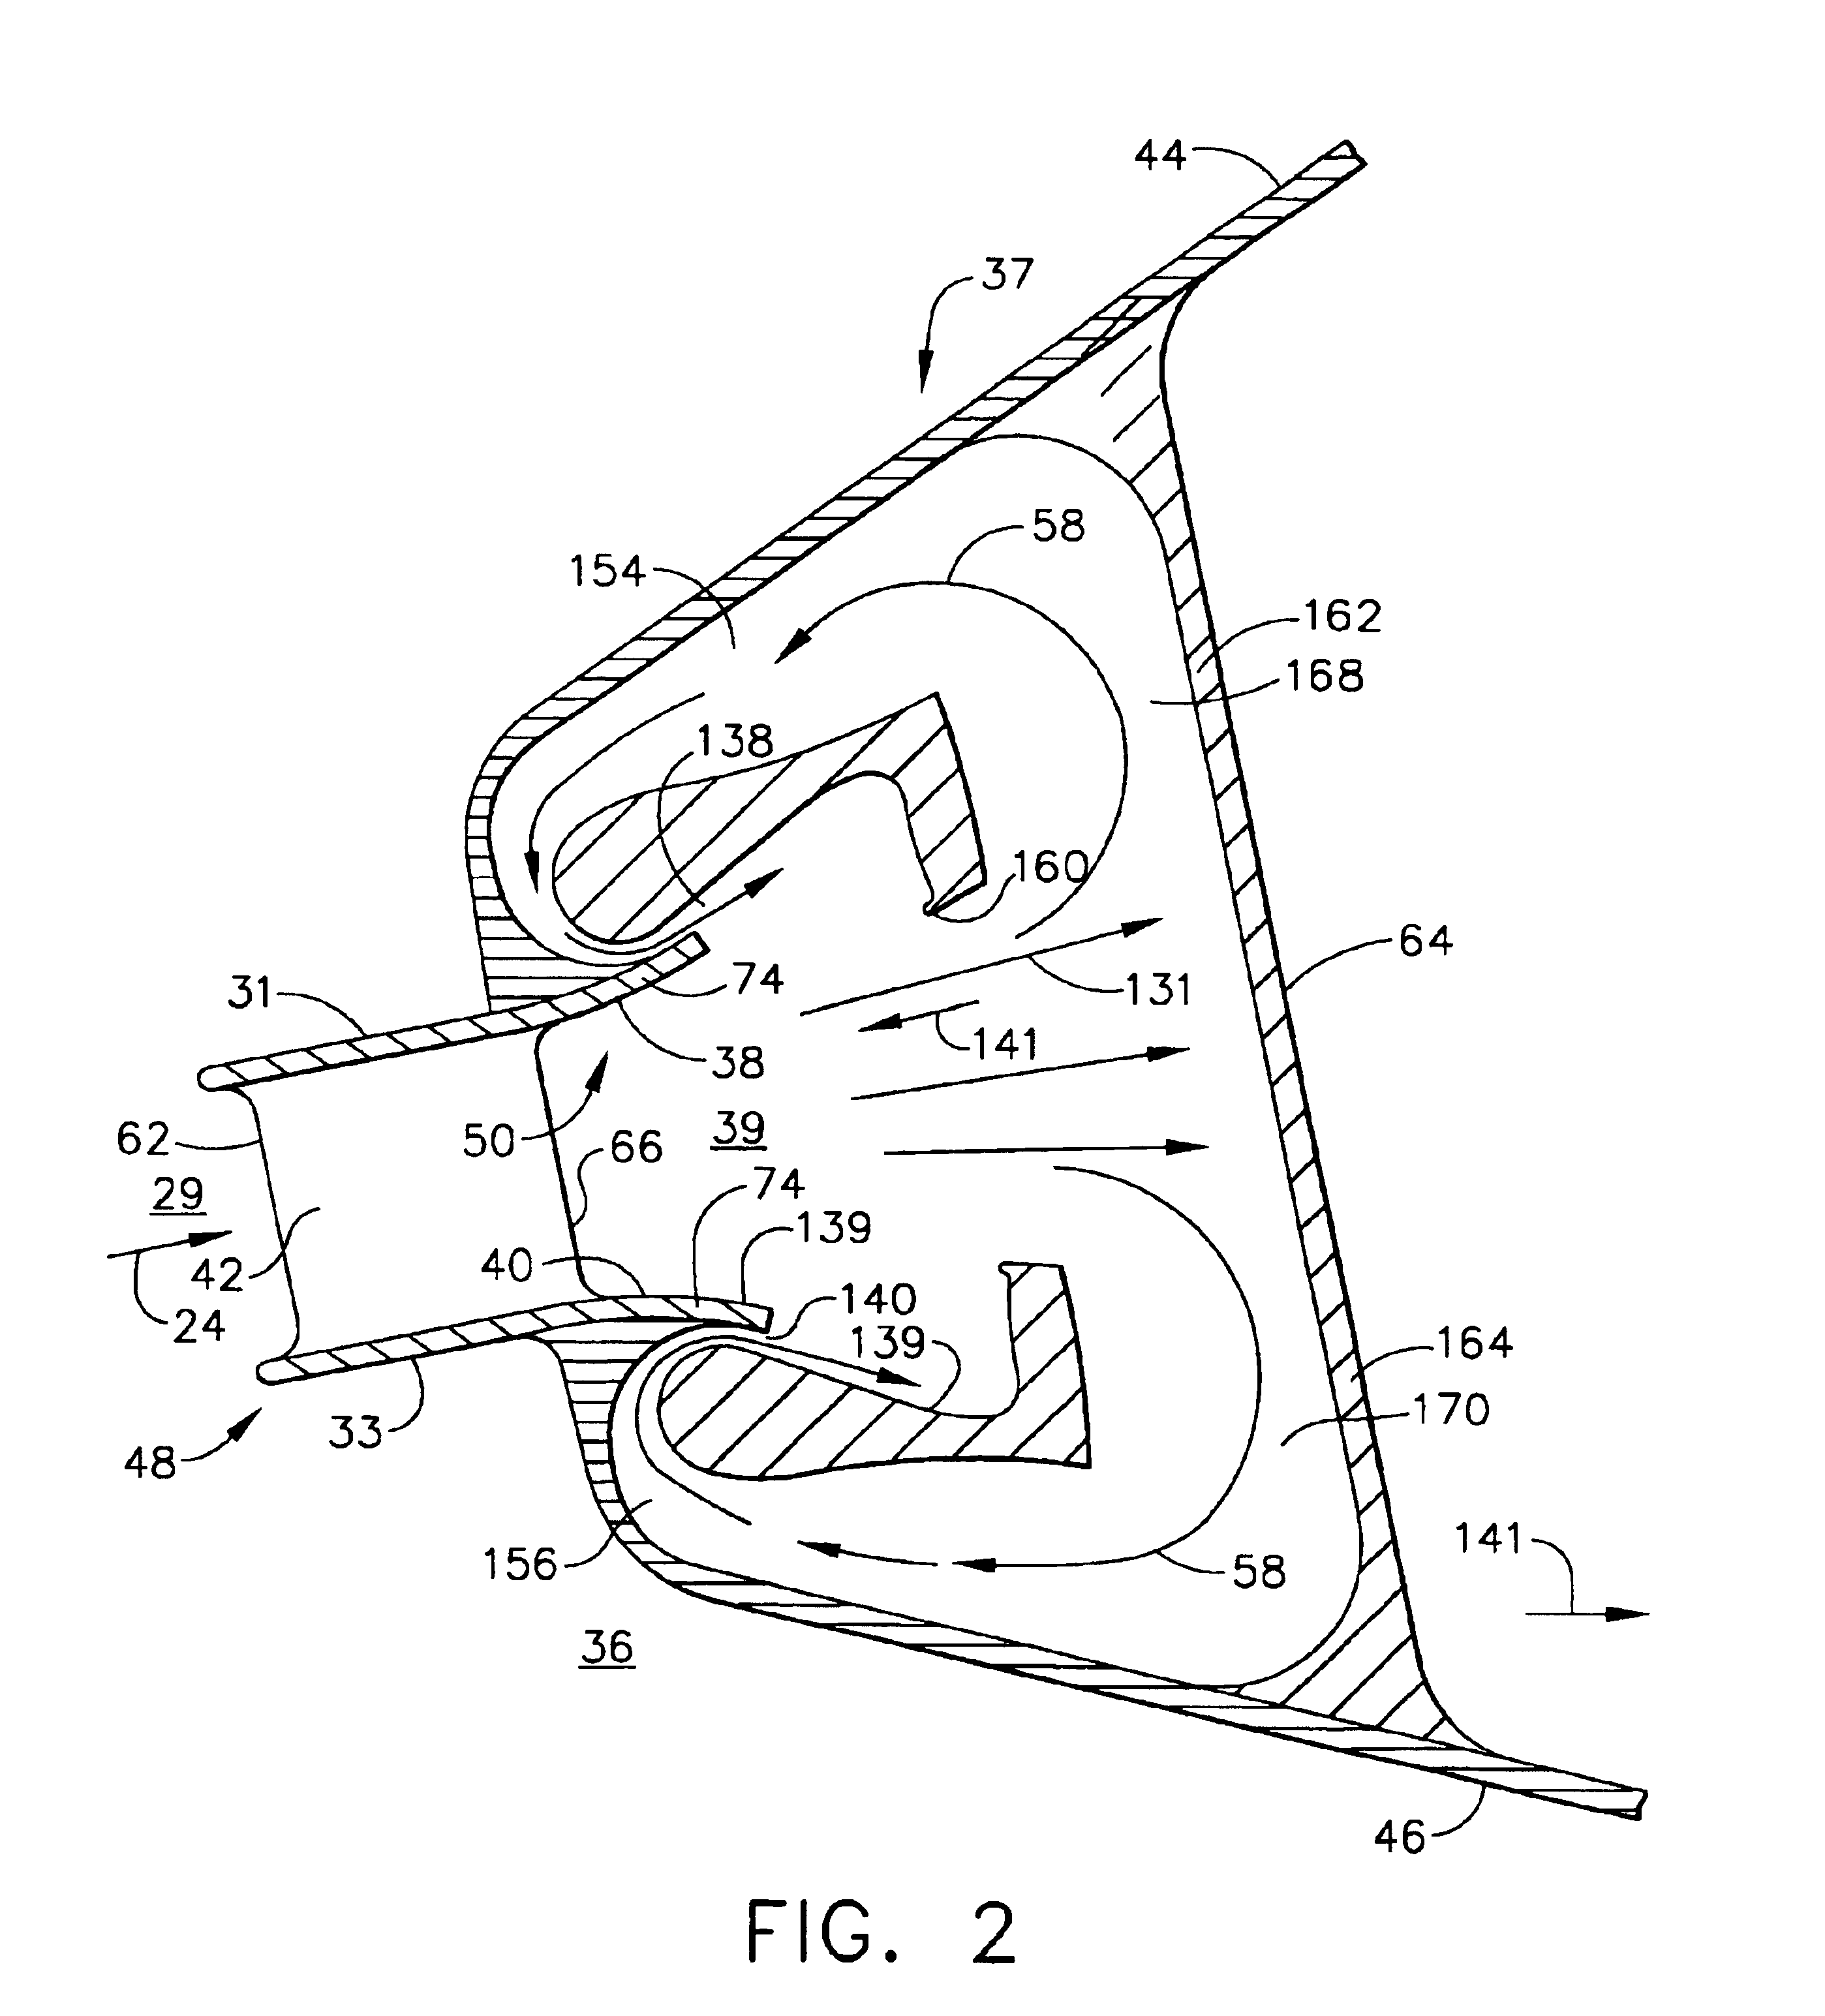 Combustor inlet diffuser with boundary layer blowing